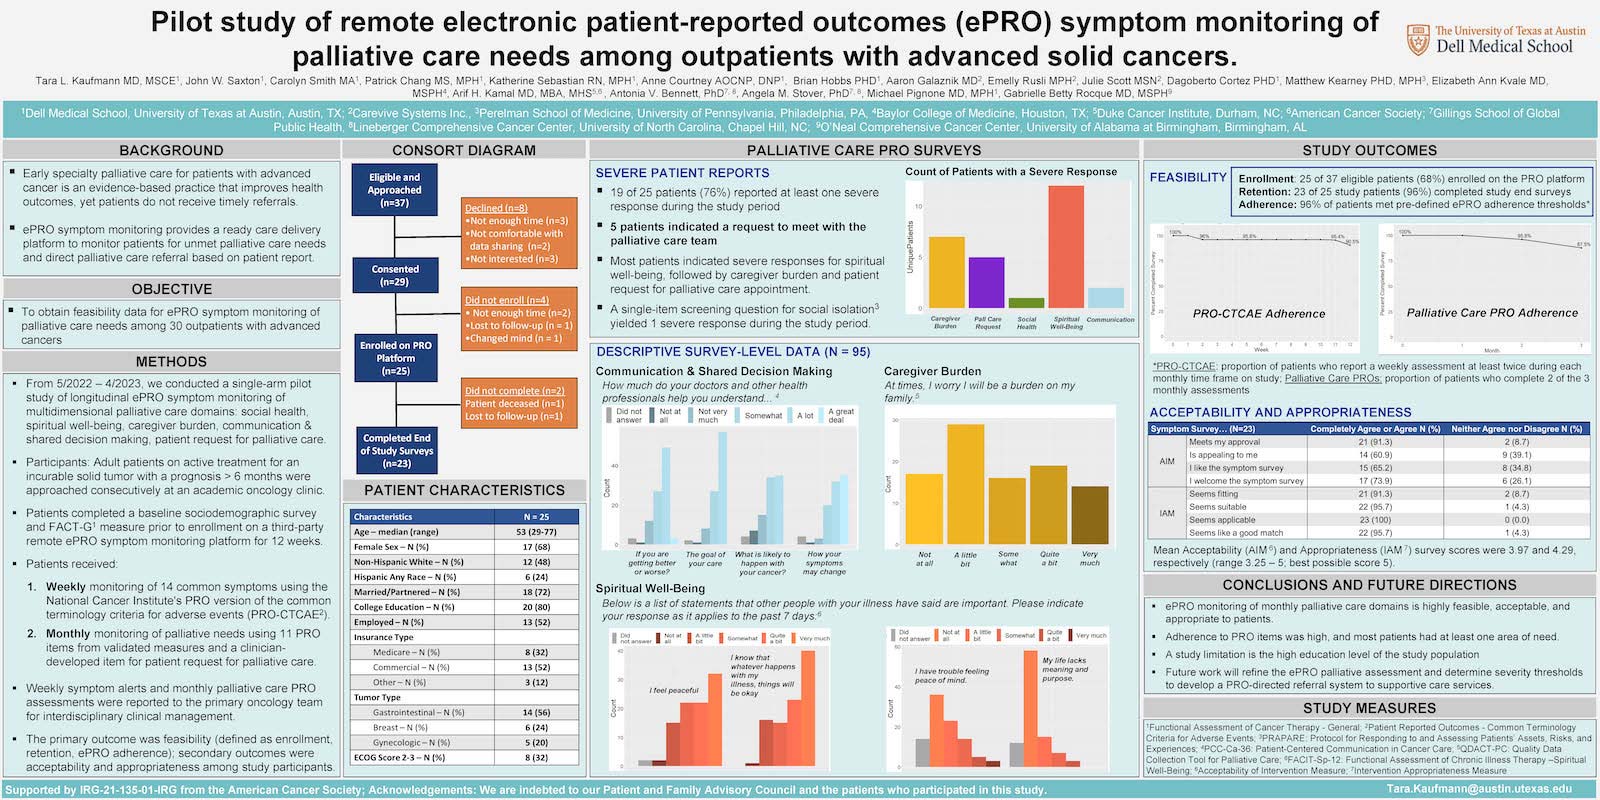 Poster: Pilot study of remote electronic patient-reported outcomes (ePRO) symptom monitoring of palliative care needs among outpatients with advanced solid cancers